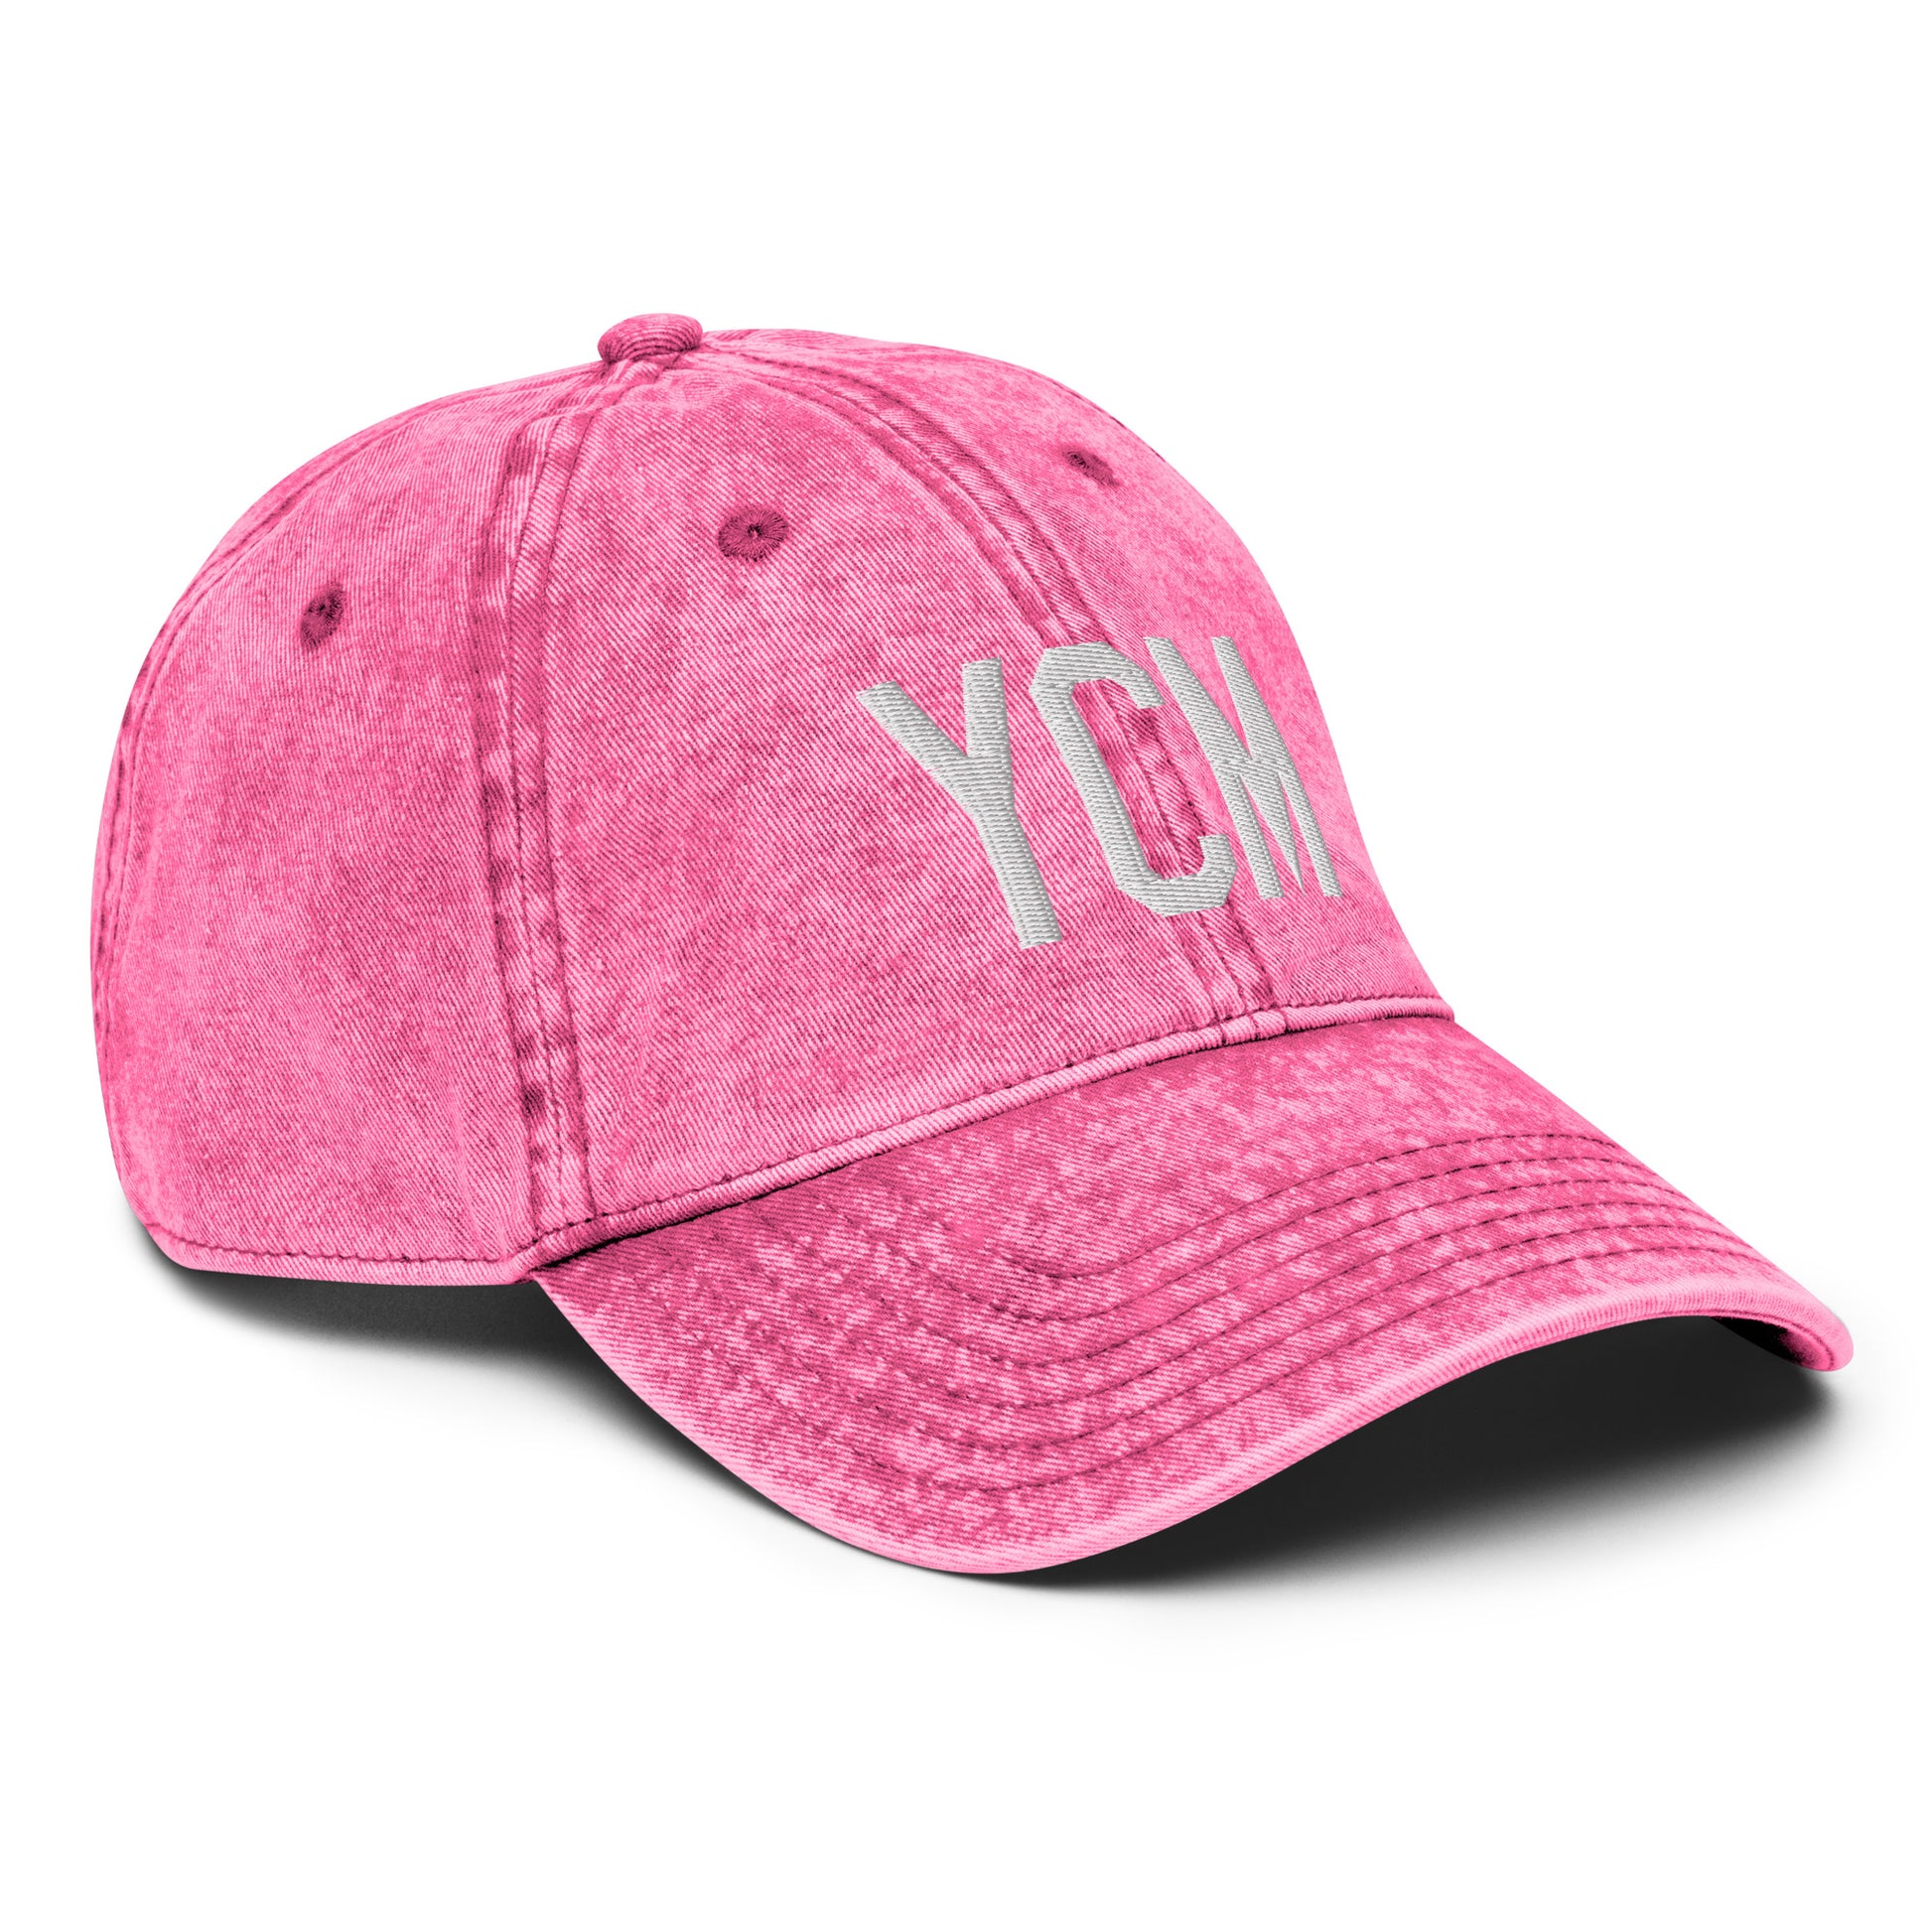 Airport Code Twill Cap - White • YCM St. Catharines • YHM Designs - Image 27